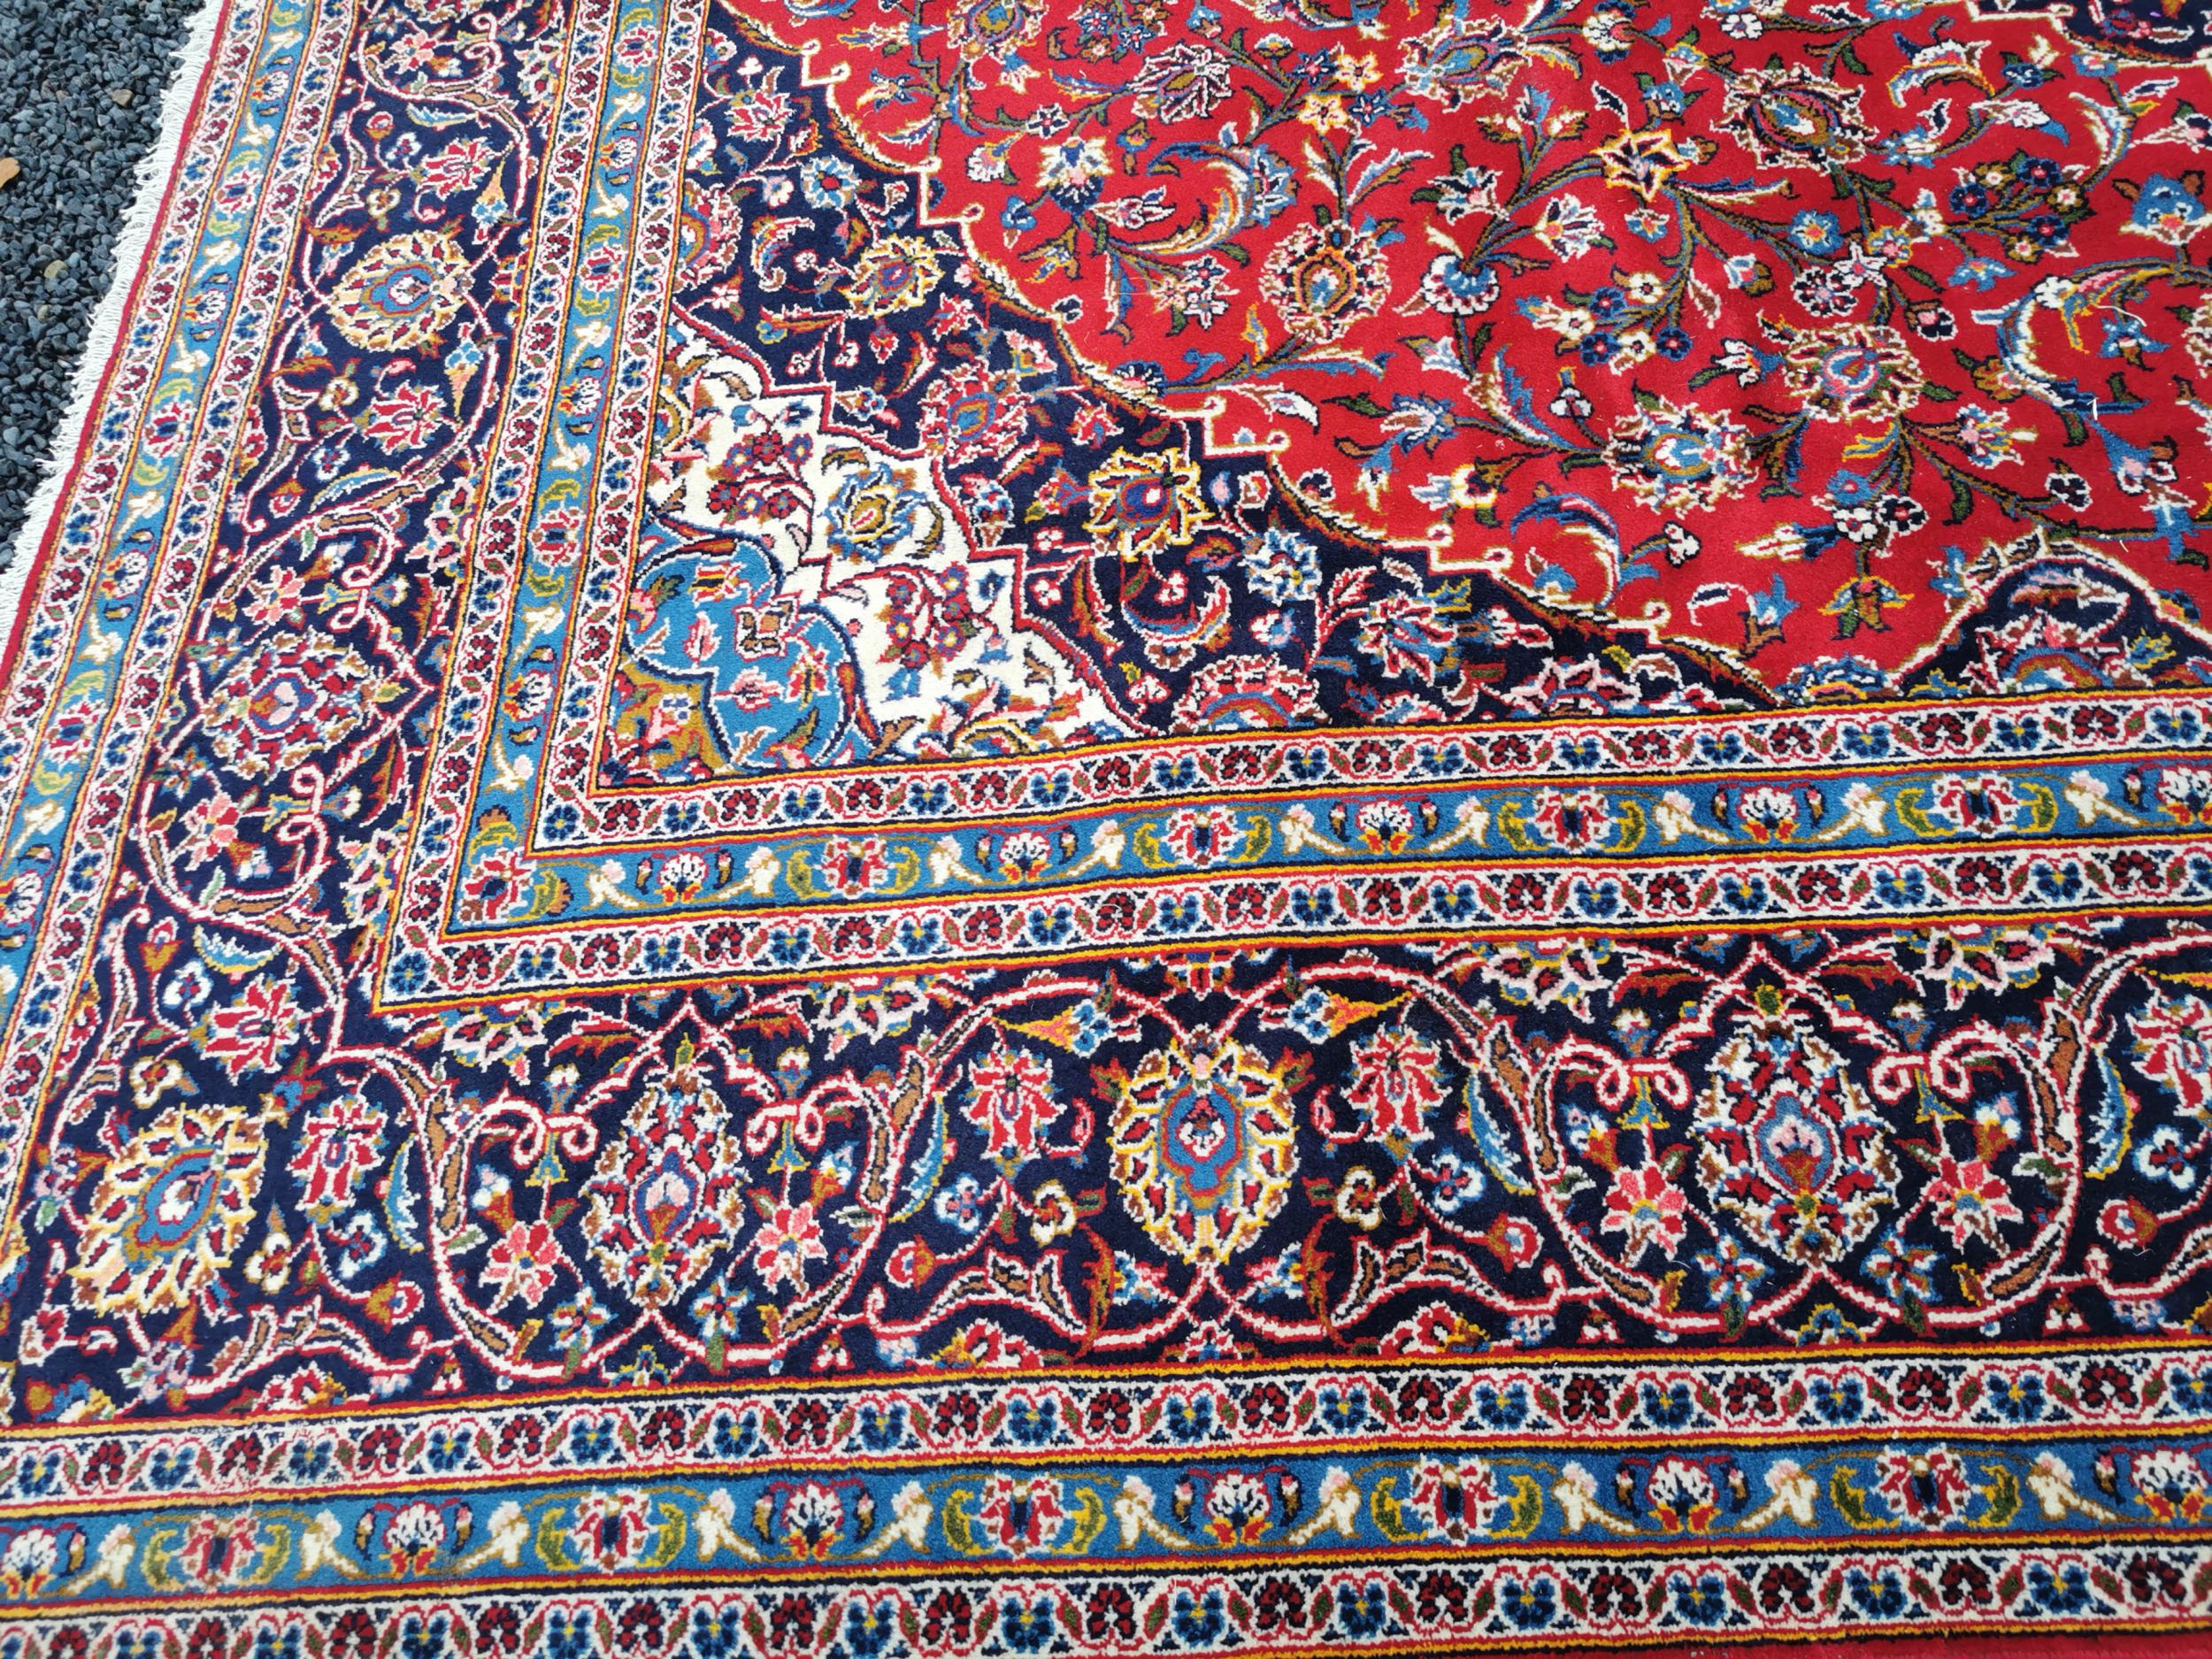 Good quality hand knotted Persian carpet square {342 cm L x 243 cm W}. - Image 5 of 7